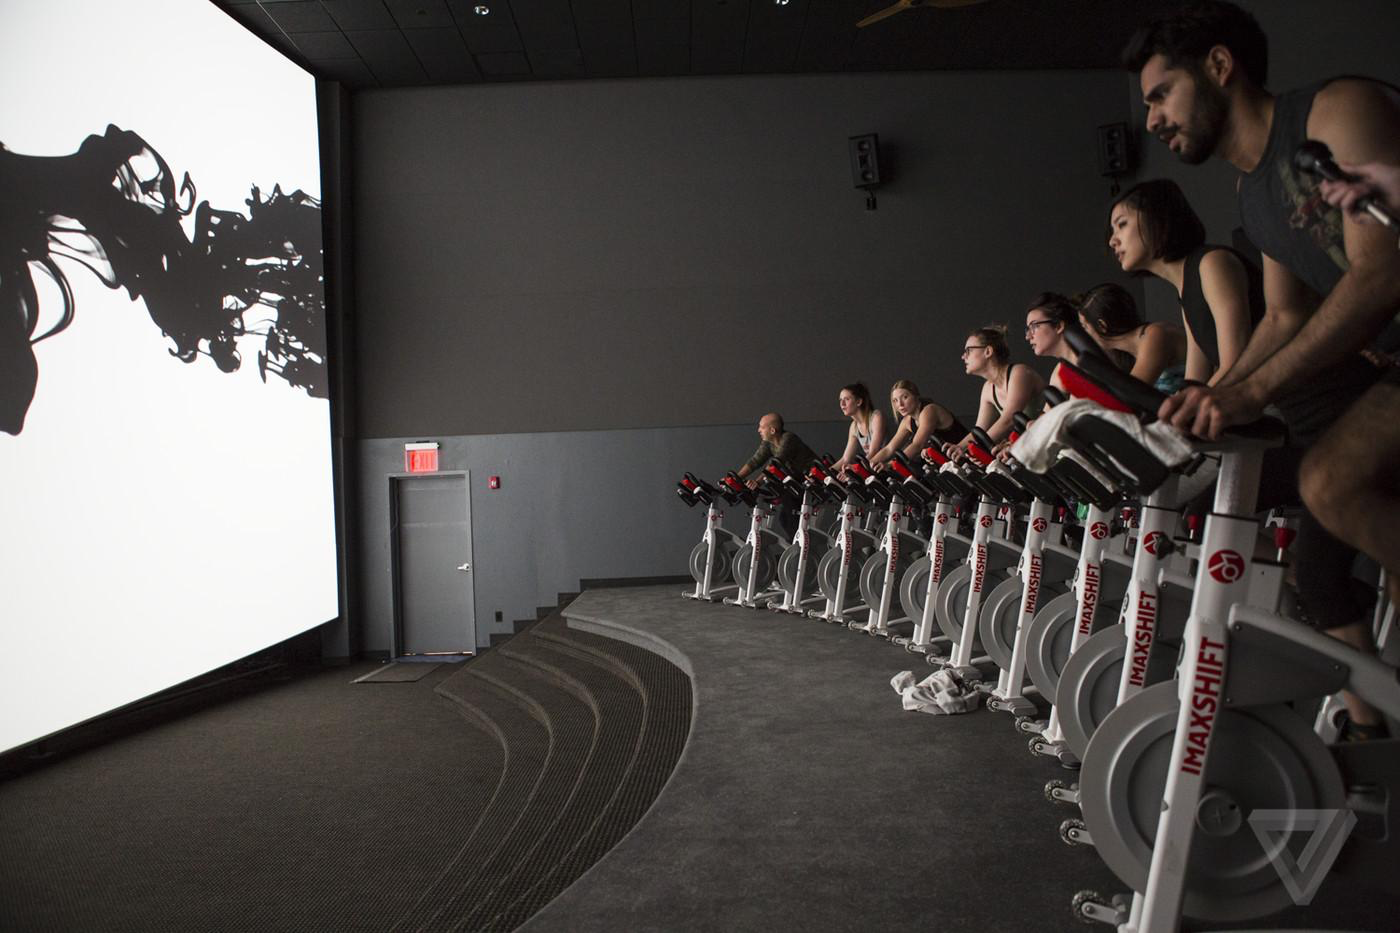 Courtesy. The Cinema & Entertainment Complex at the Grove will have a movie theater outfitted with spin bikes for movie-goers who want to exercise while they take in a film.